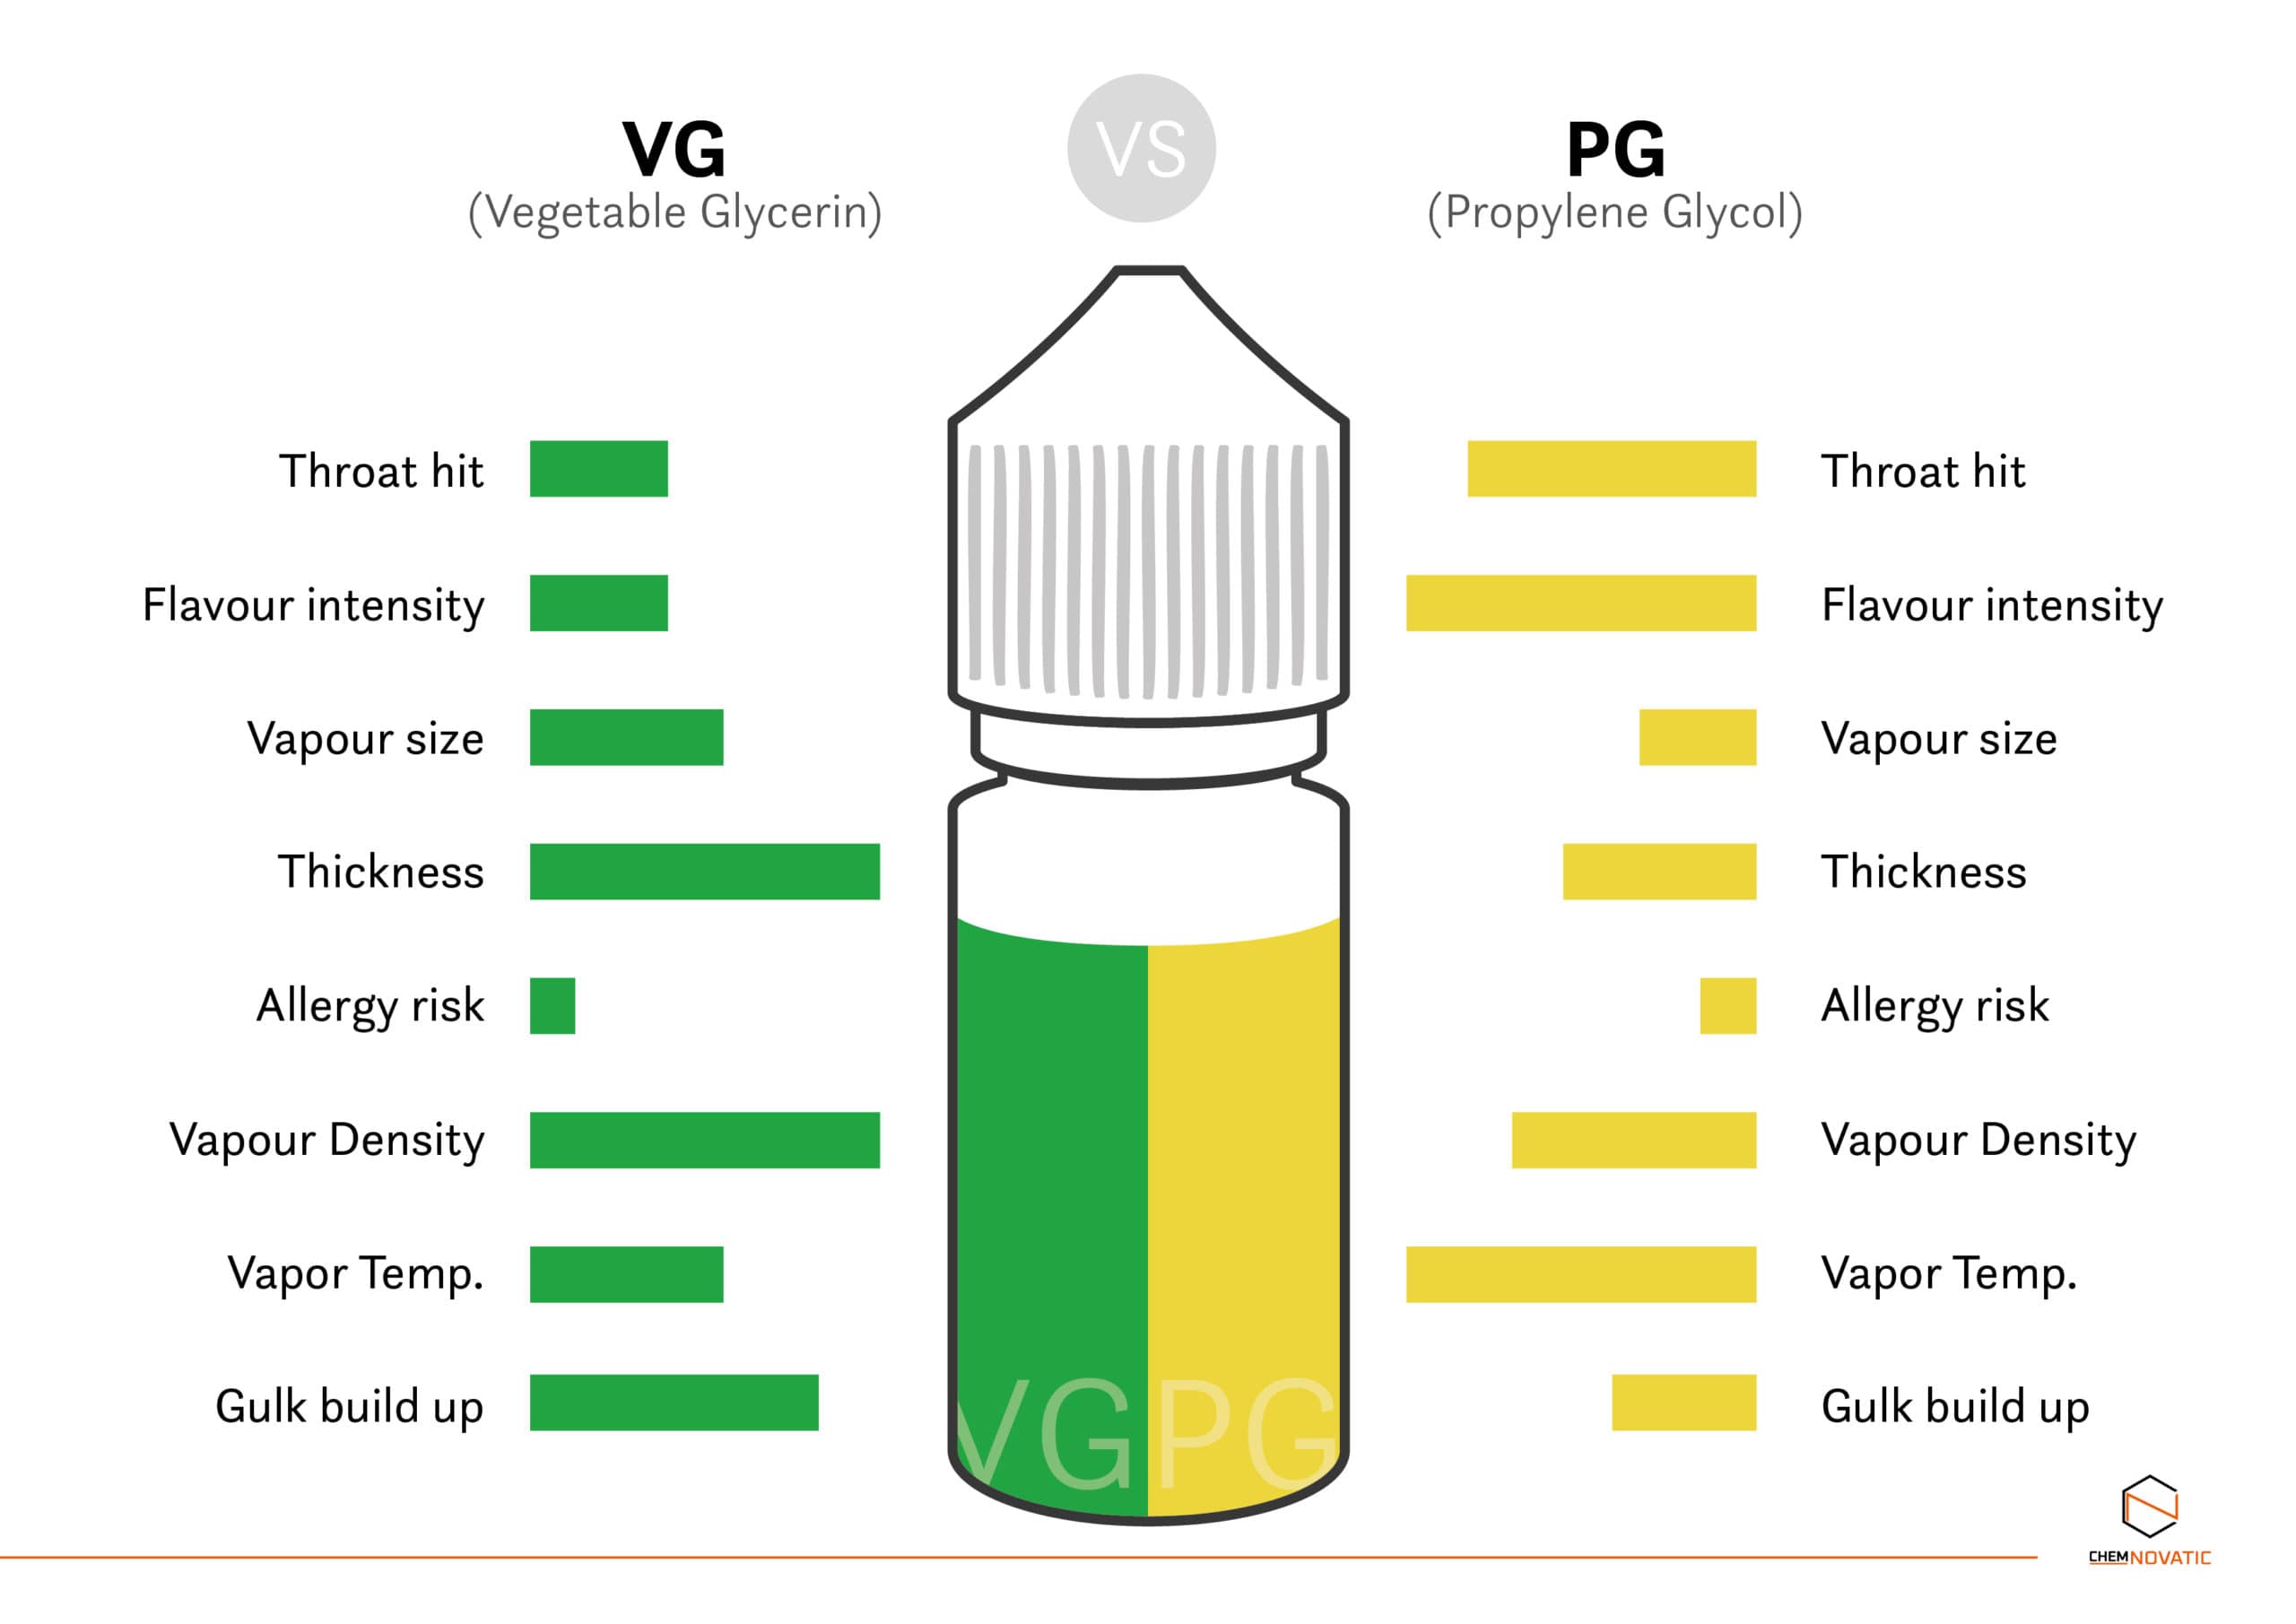 PG propylene glycol and VG vegetable glycerine comaprison in terms of: throat hit, flavour intensity, vapour size, thickness, allergy risk, vapour density, vapour temperature, gulk build up